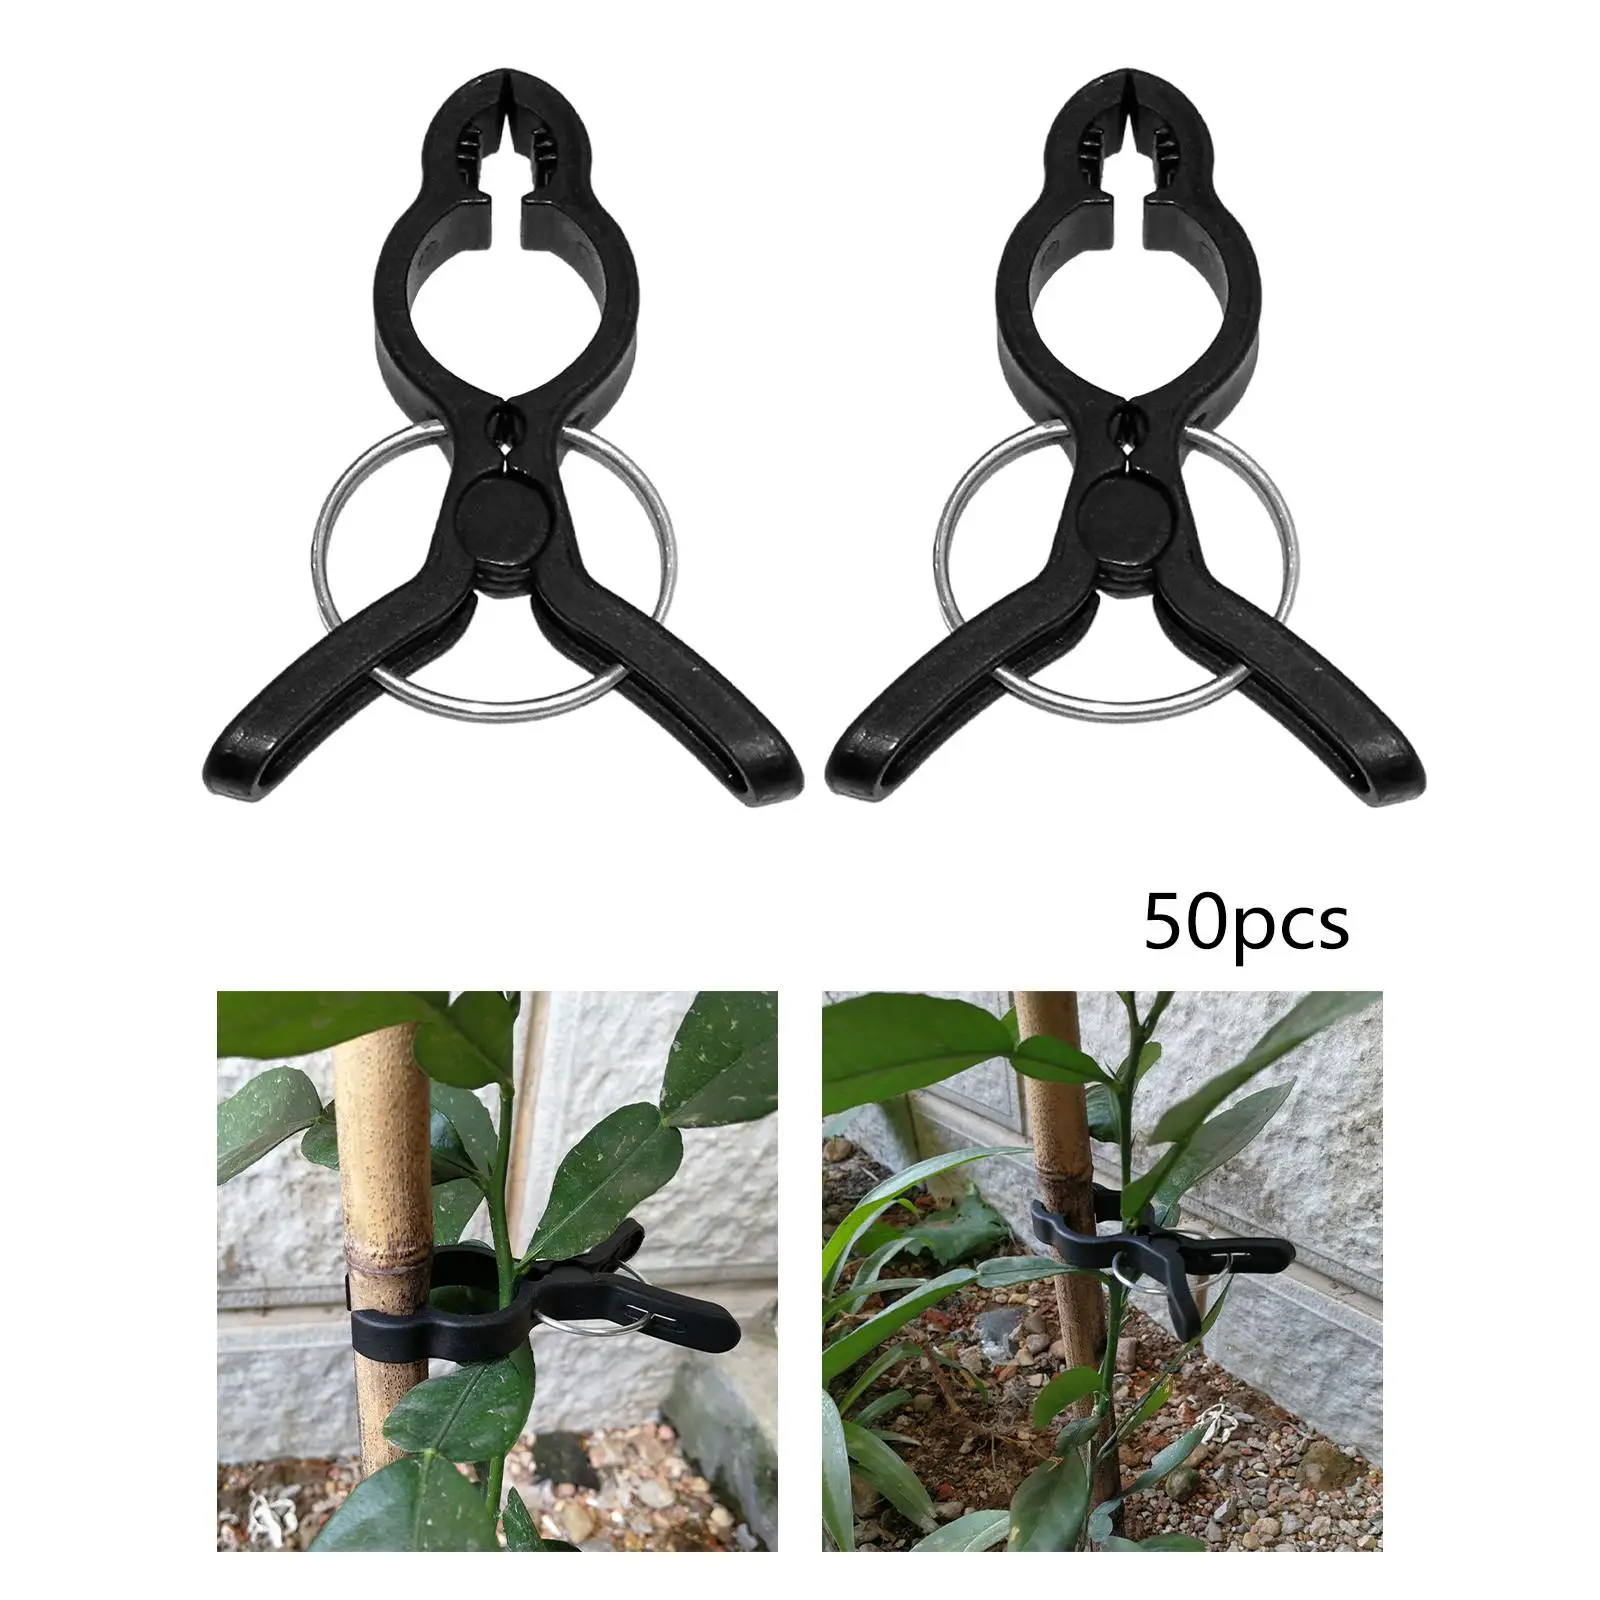 50 Pieces Garden Plant Support Clips Vines Supporter Frame Vines Flower Clamps Tomato Vine Clips for Straightening Tomato Cage